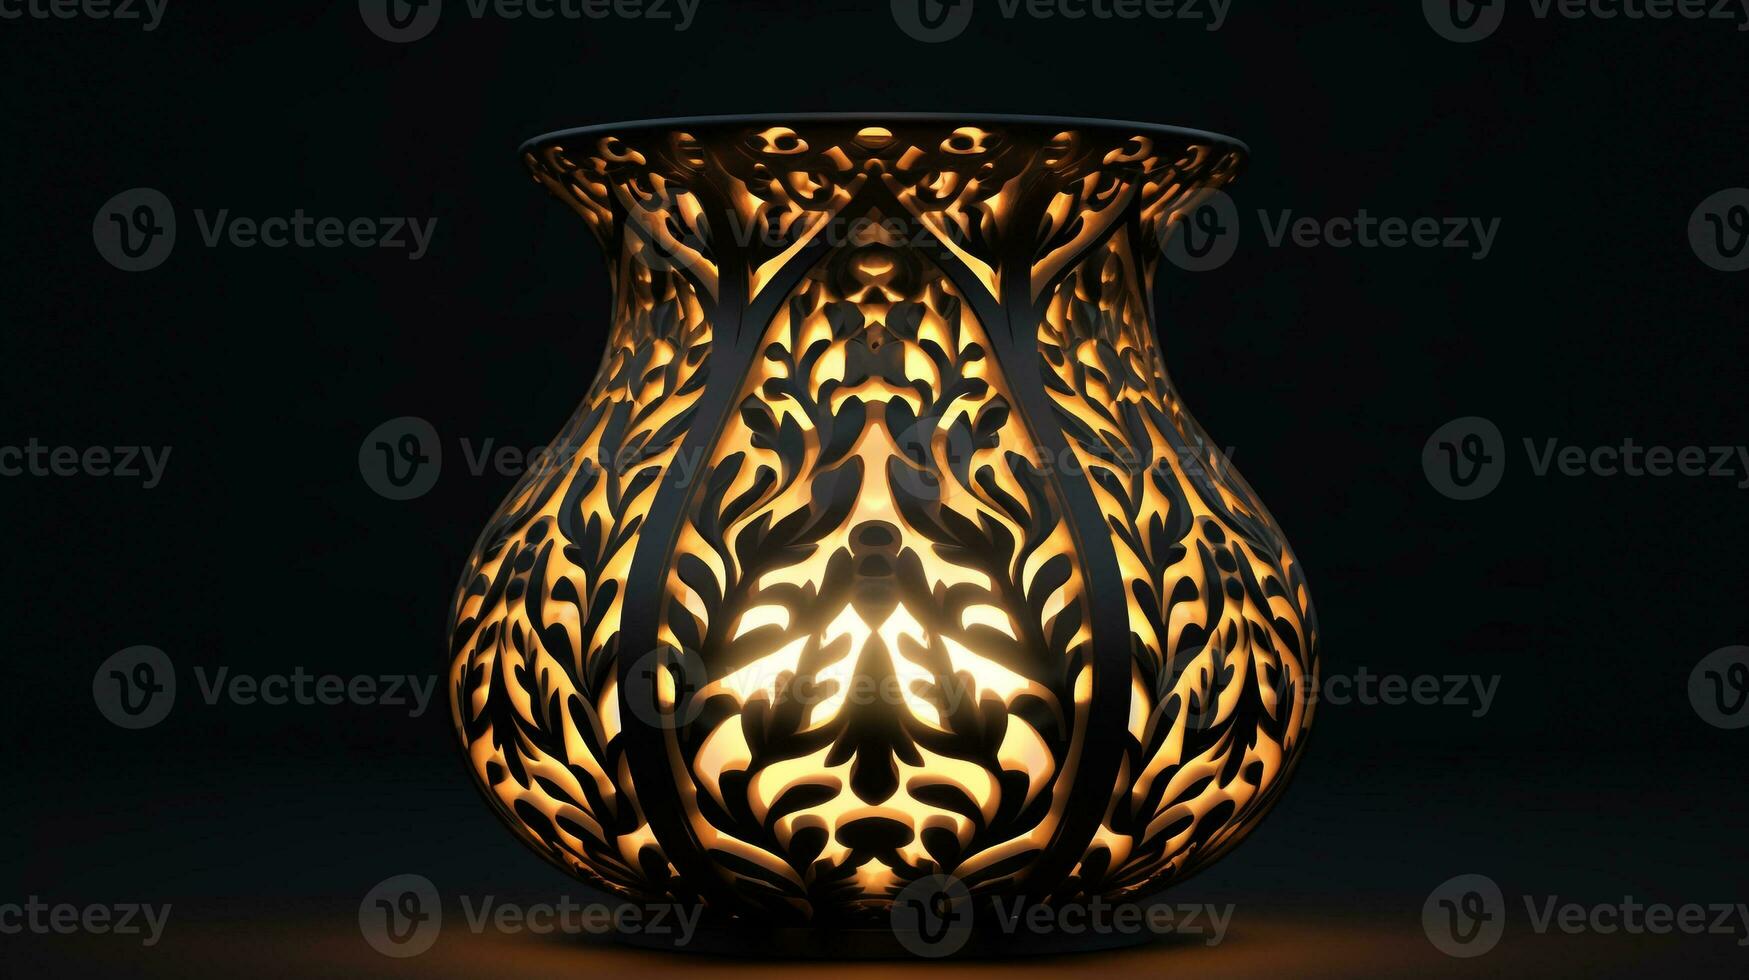 Diwali lamp pattern with candle on black background, diwali stock images, realistic stock photos